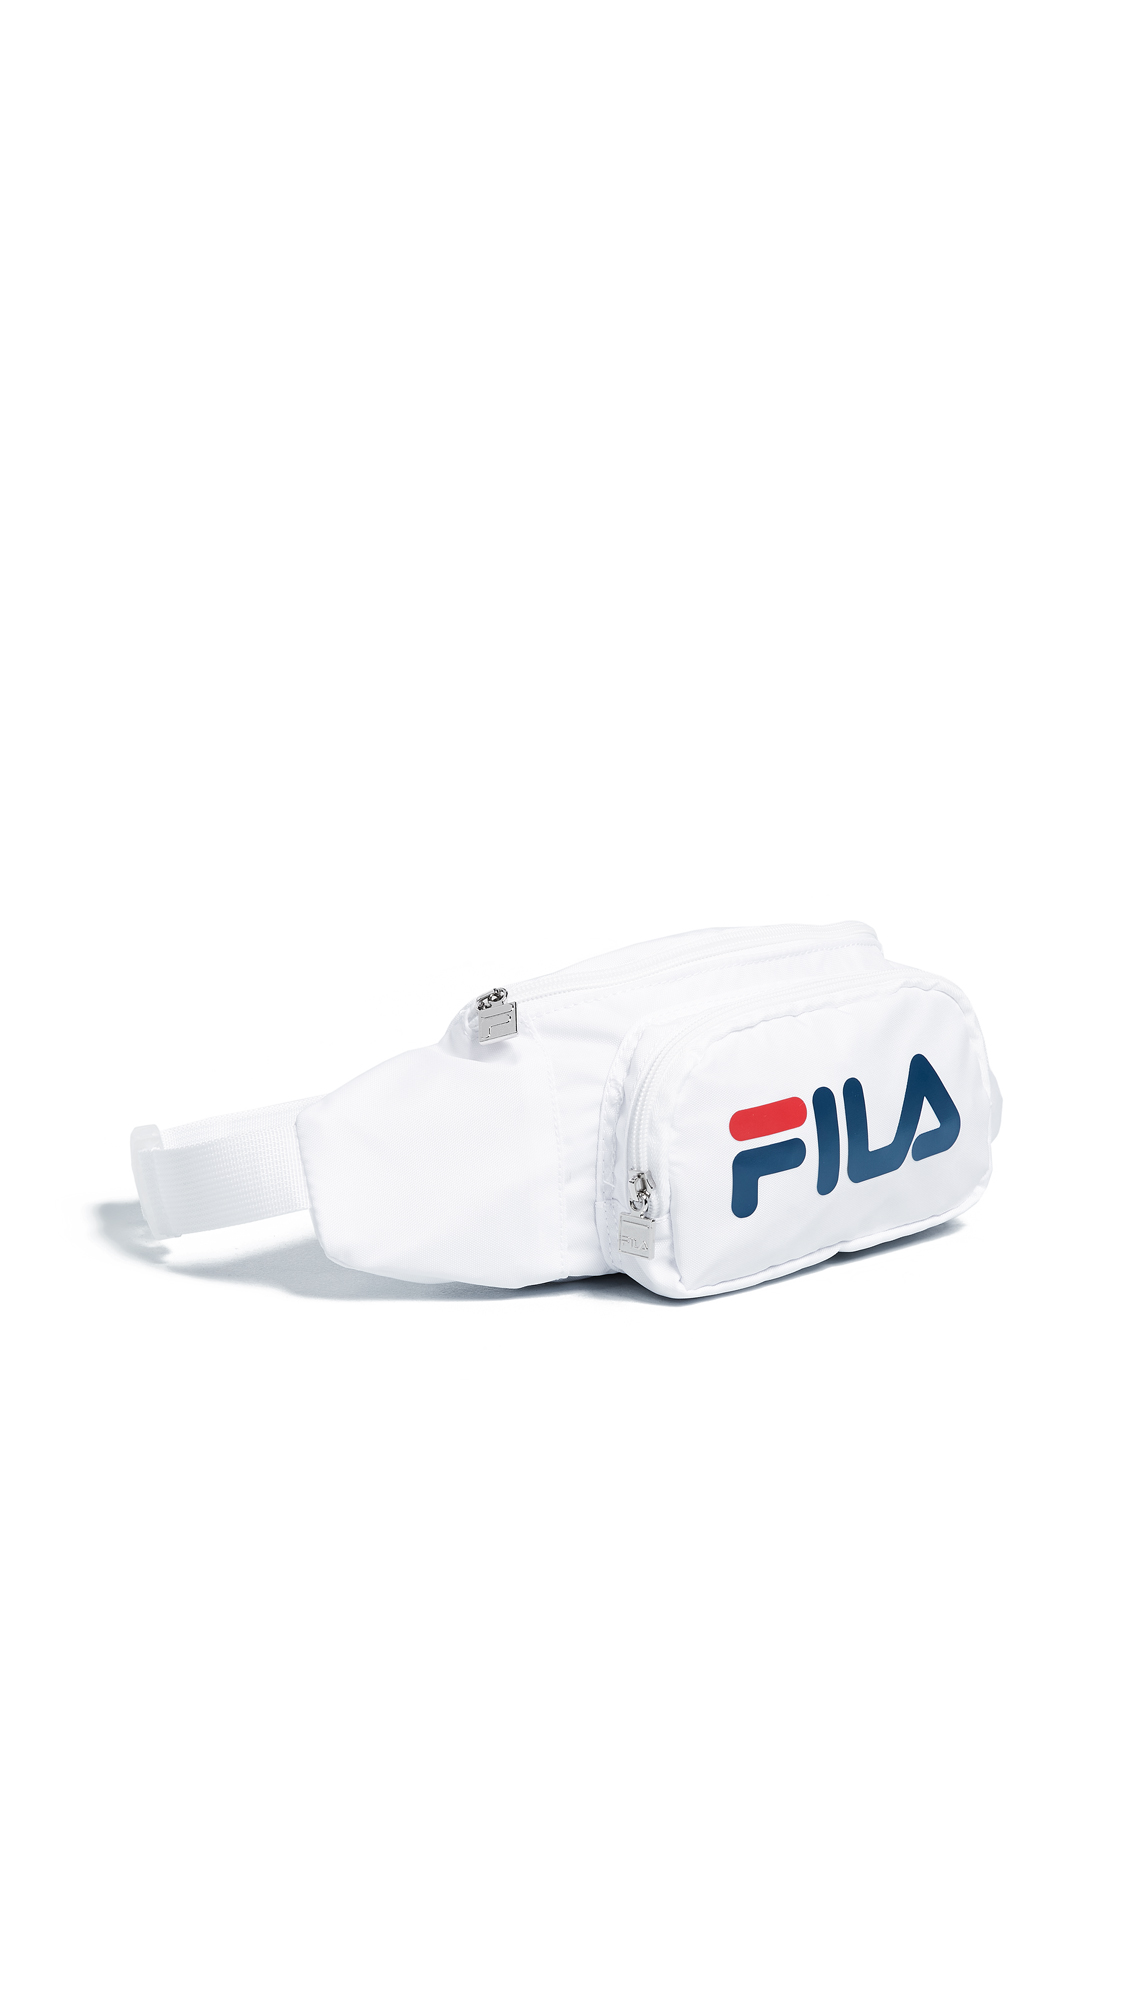 Fila Women's Fanny Pack, White/Red/Peacoat, One Size